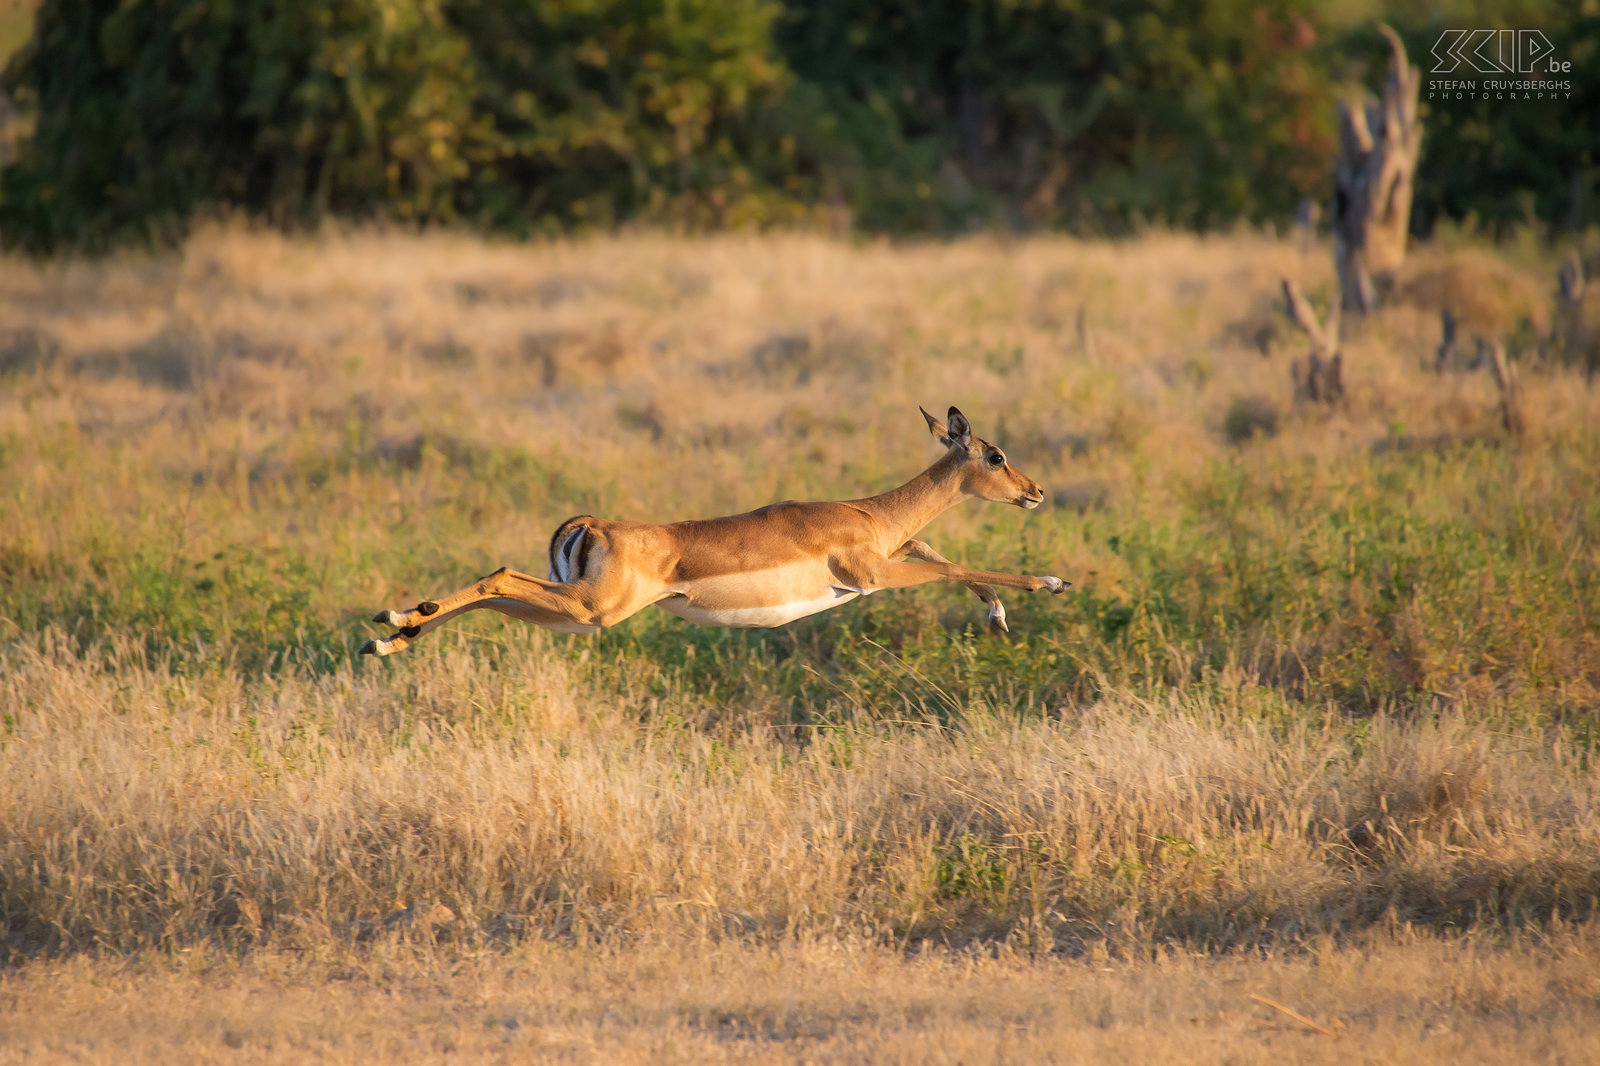 South Luangwa - Jumping impala Impalas are known for their great leaping ability, reaching heights up to 3m. Stefan Cruysberghs